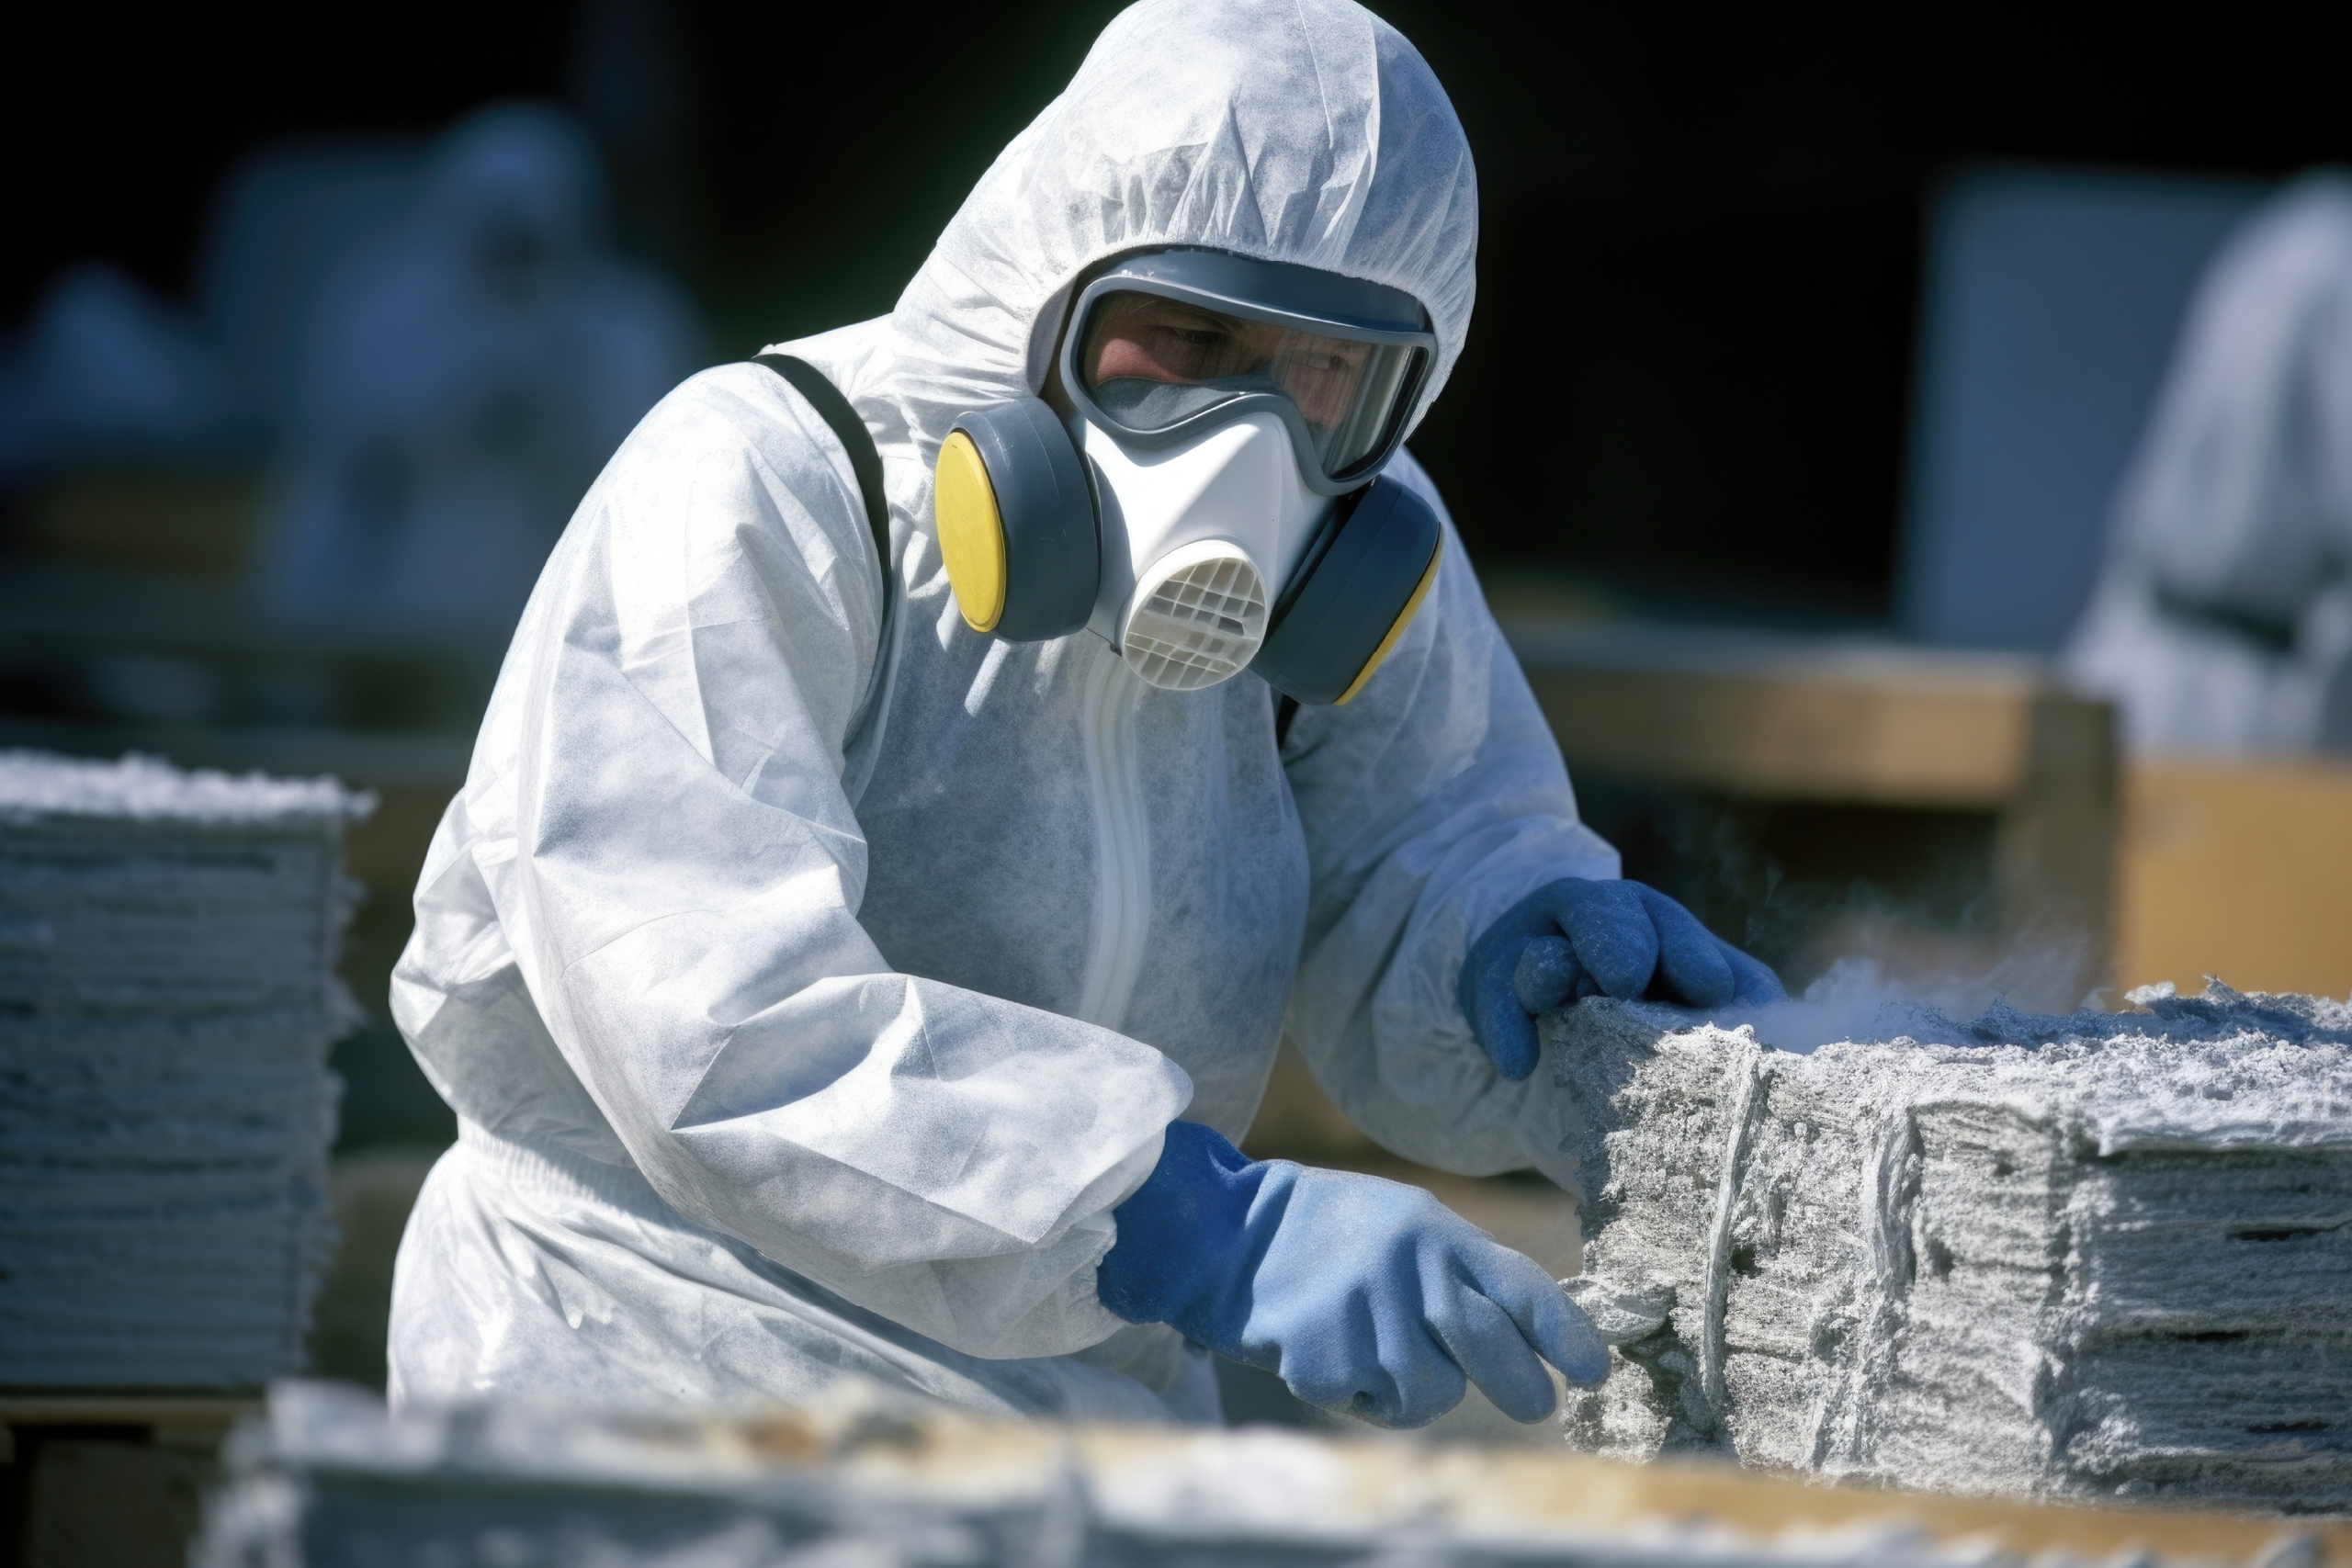 A man in a hazmat suit dealing with insulation